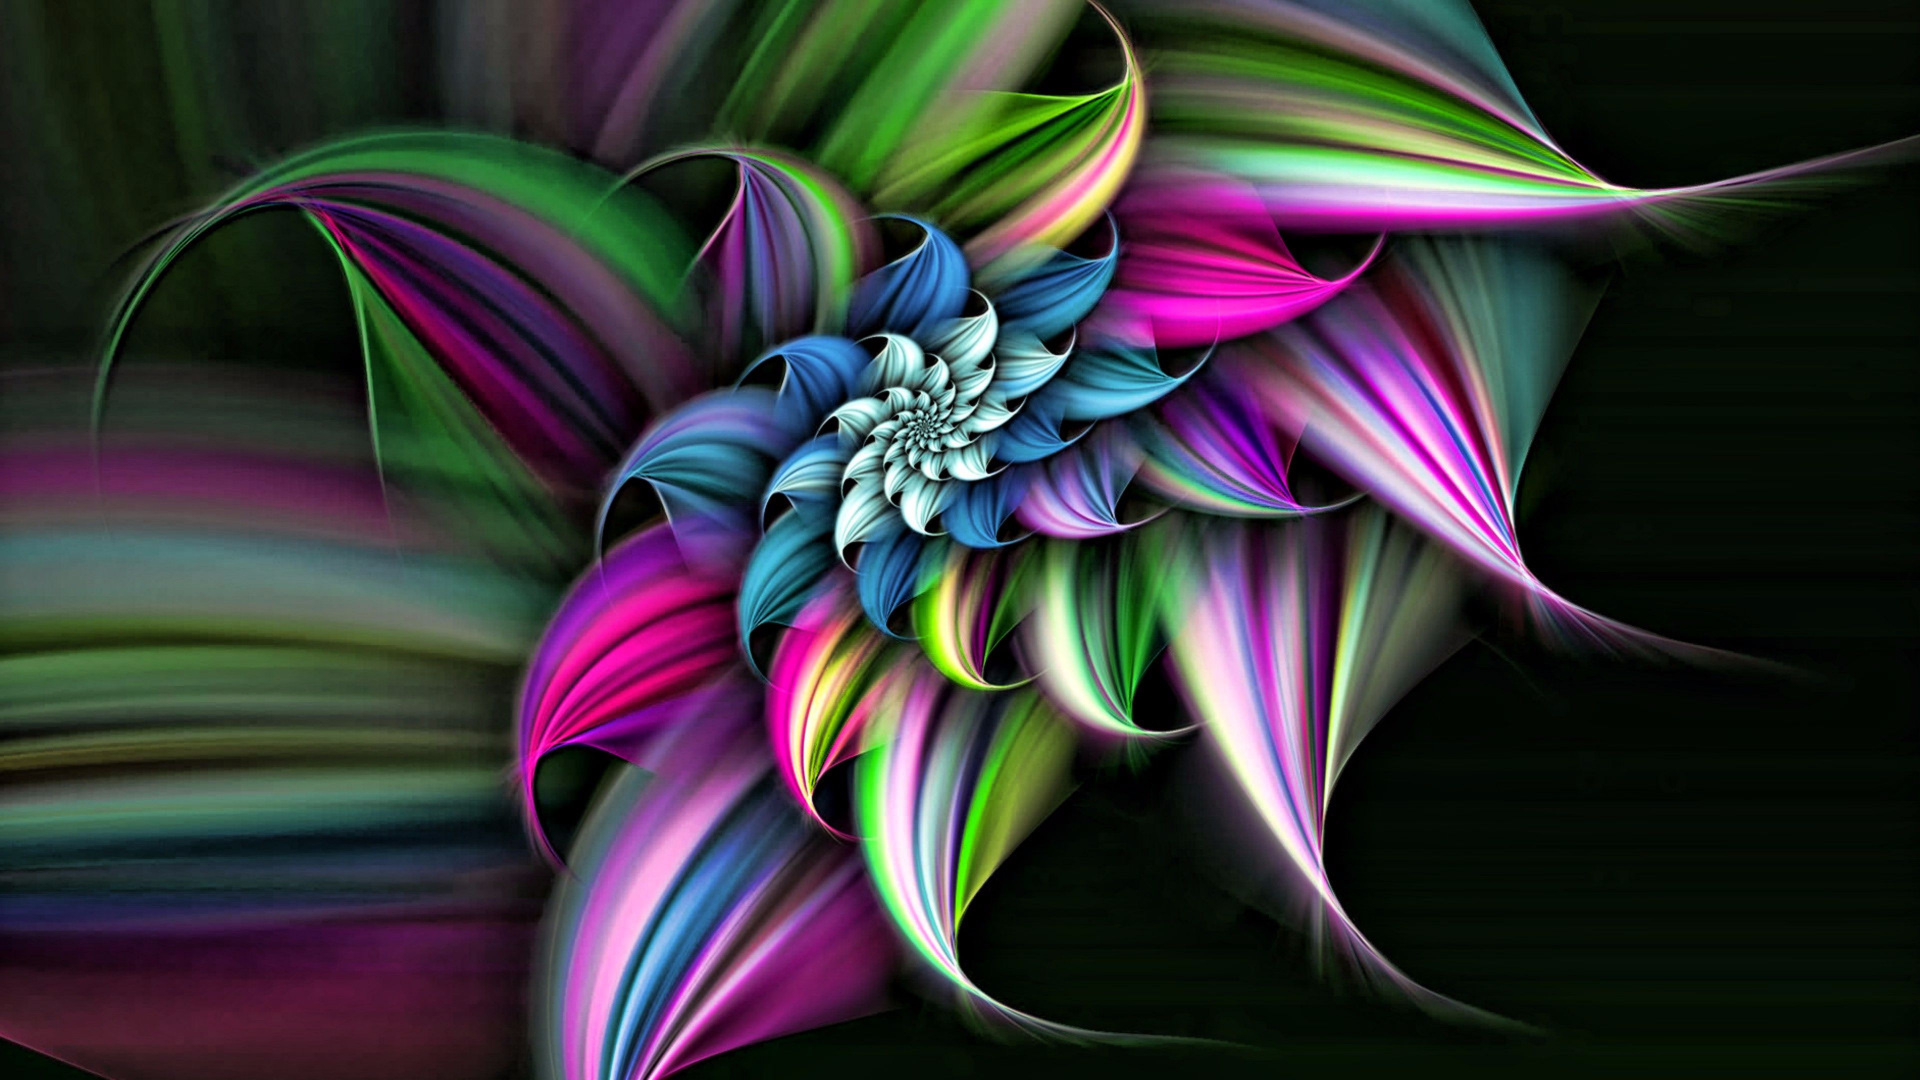 Purple and Green Flower Illustration. Wallpaper in 1920x1080 Resolution